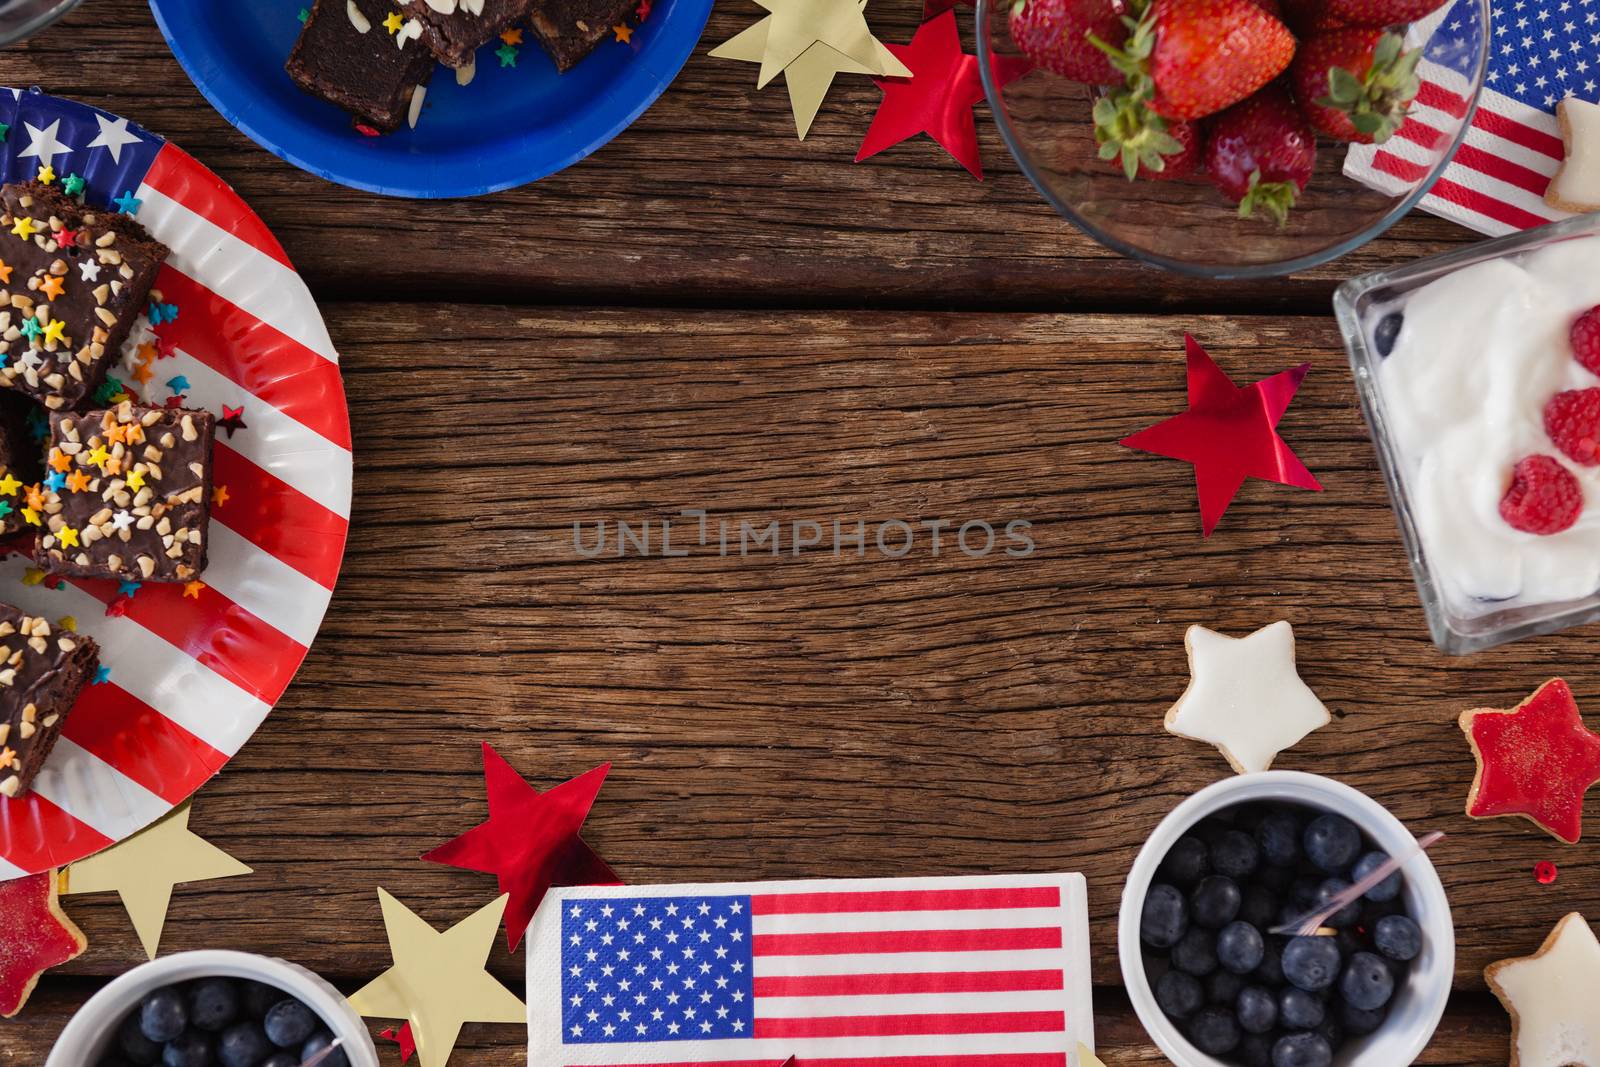 Various sweet foods and fruits arranged on wooden table with 4th July theme